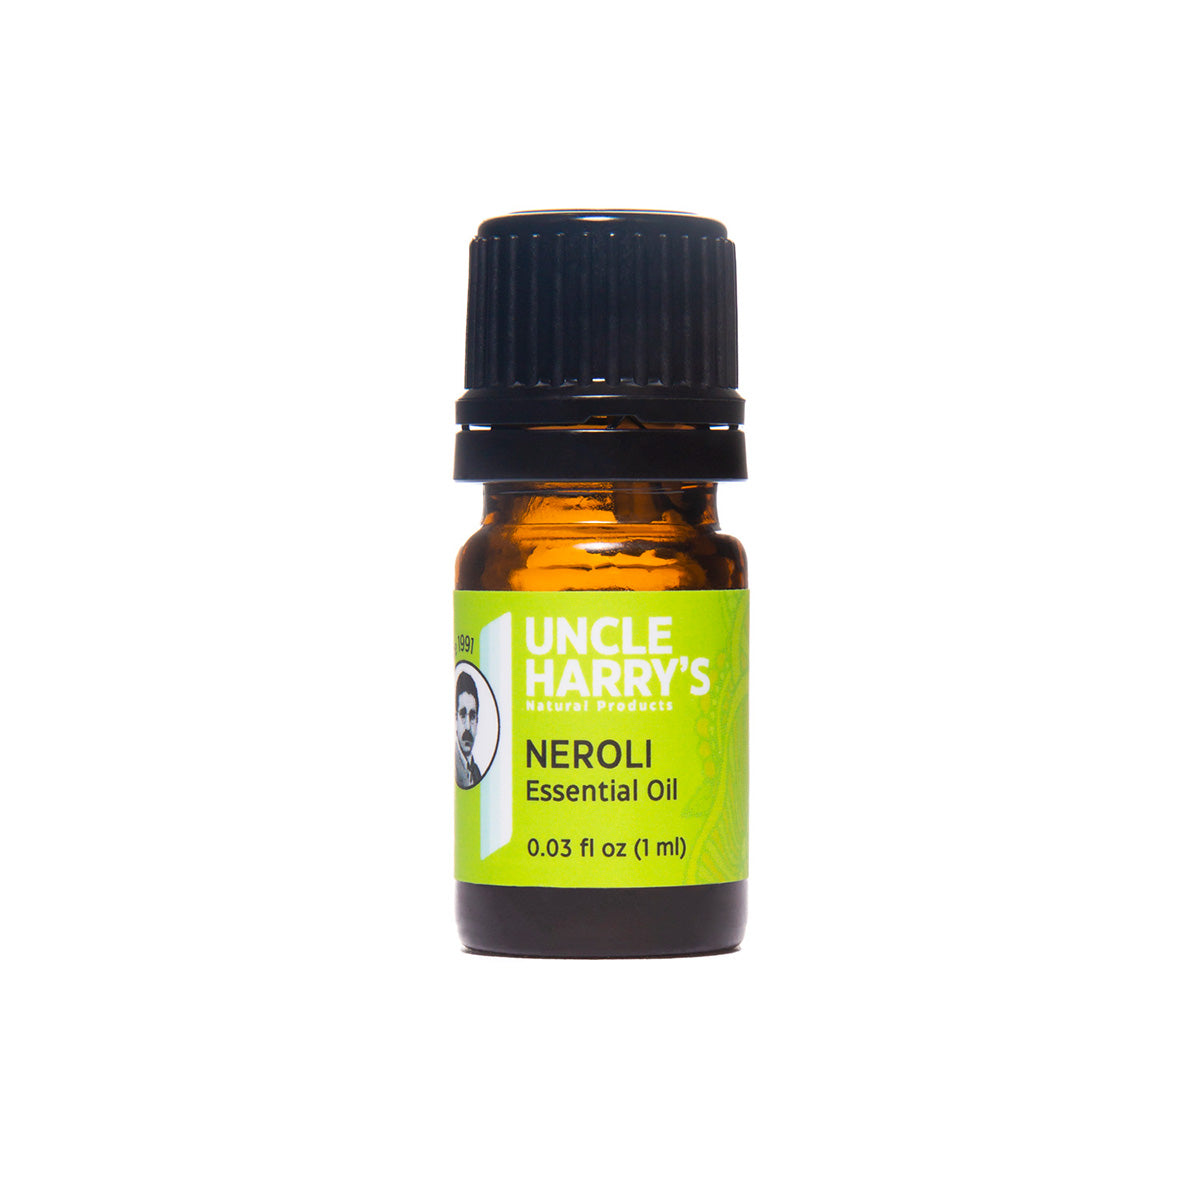 Neroli Oil (1 ml) – Uncle Harry's Natural Products